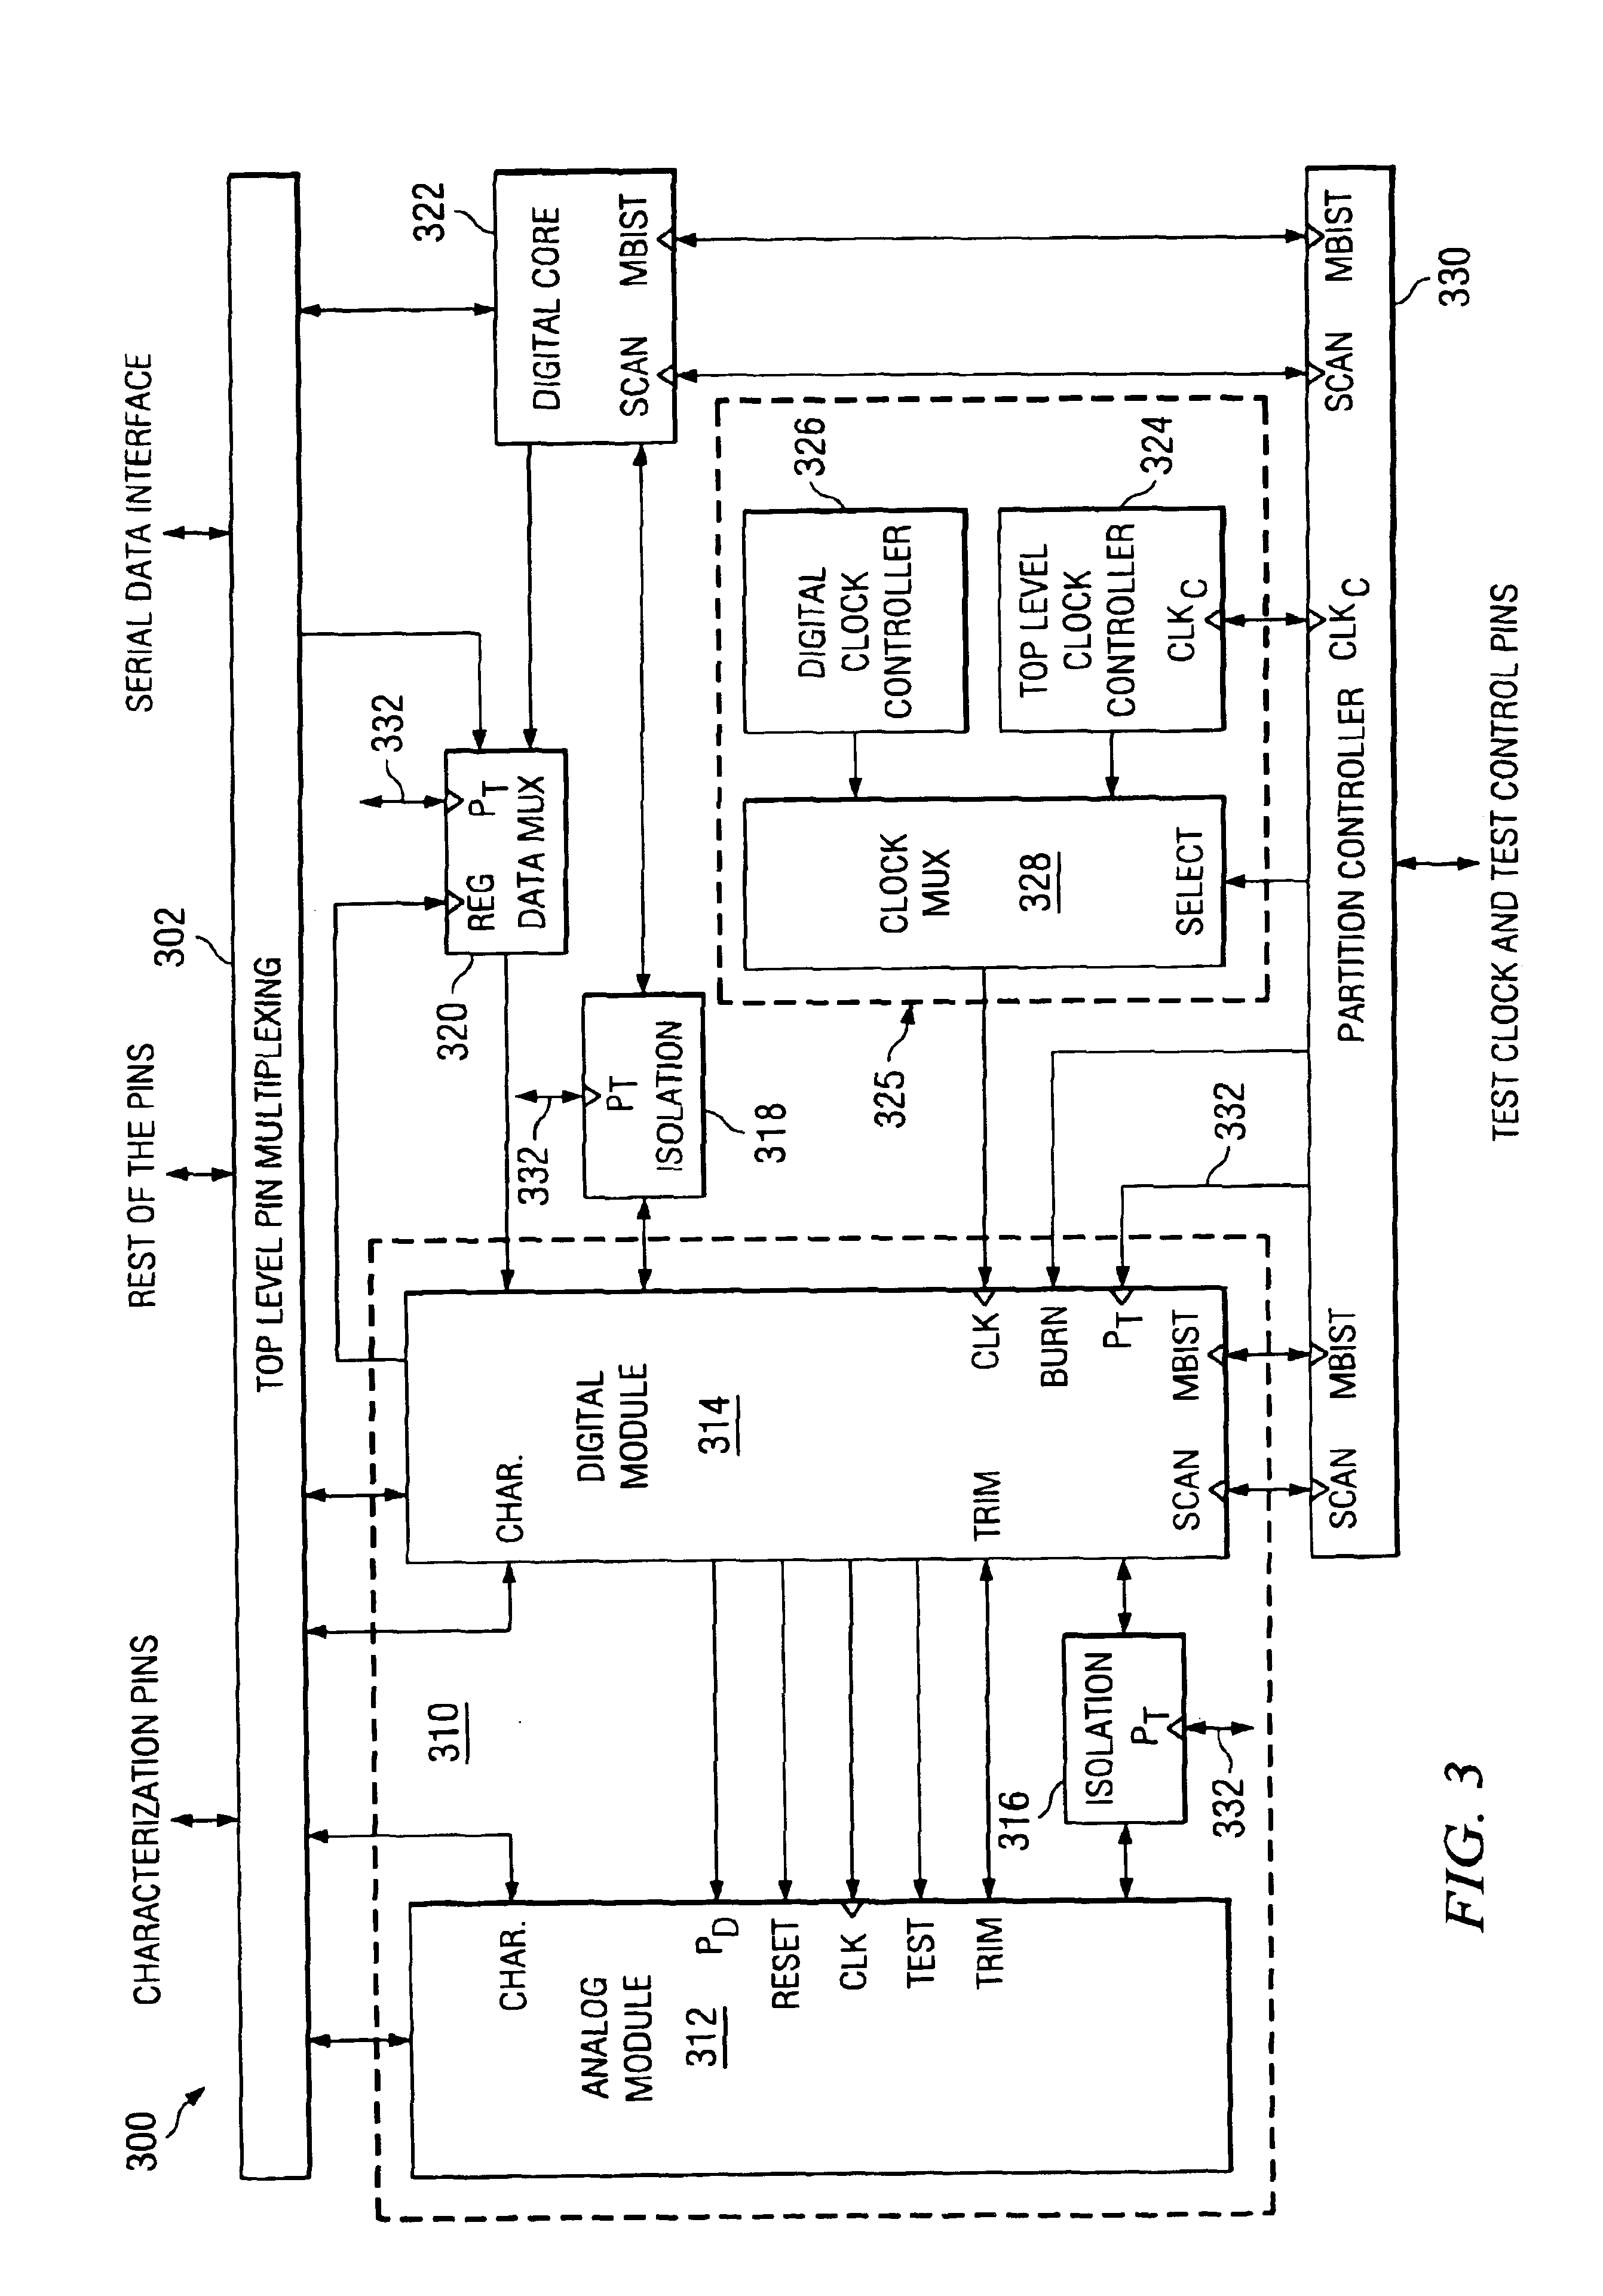 Mixed-signal core design for concurrent testing of mixed-signal, analog, and digital components